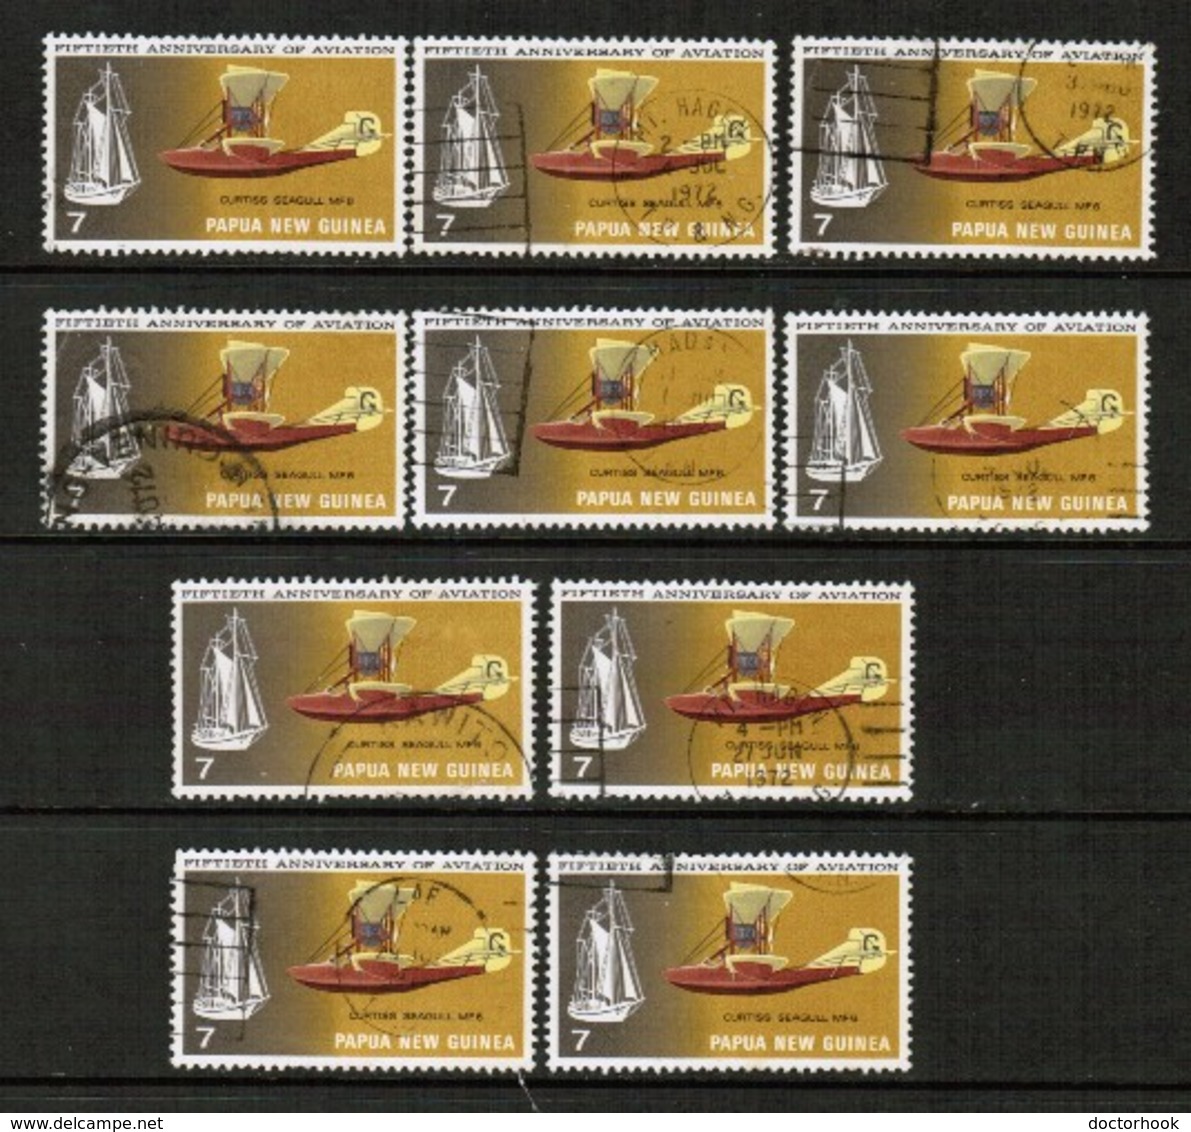 PAPUA NEW GUINEA  Scott # 348 USED WHOLESALE LOT OF 10 (WH-409) - Vrac (max 999 Timbres)